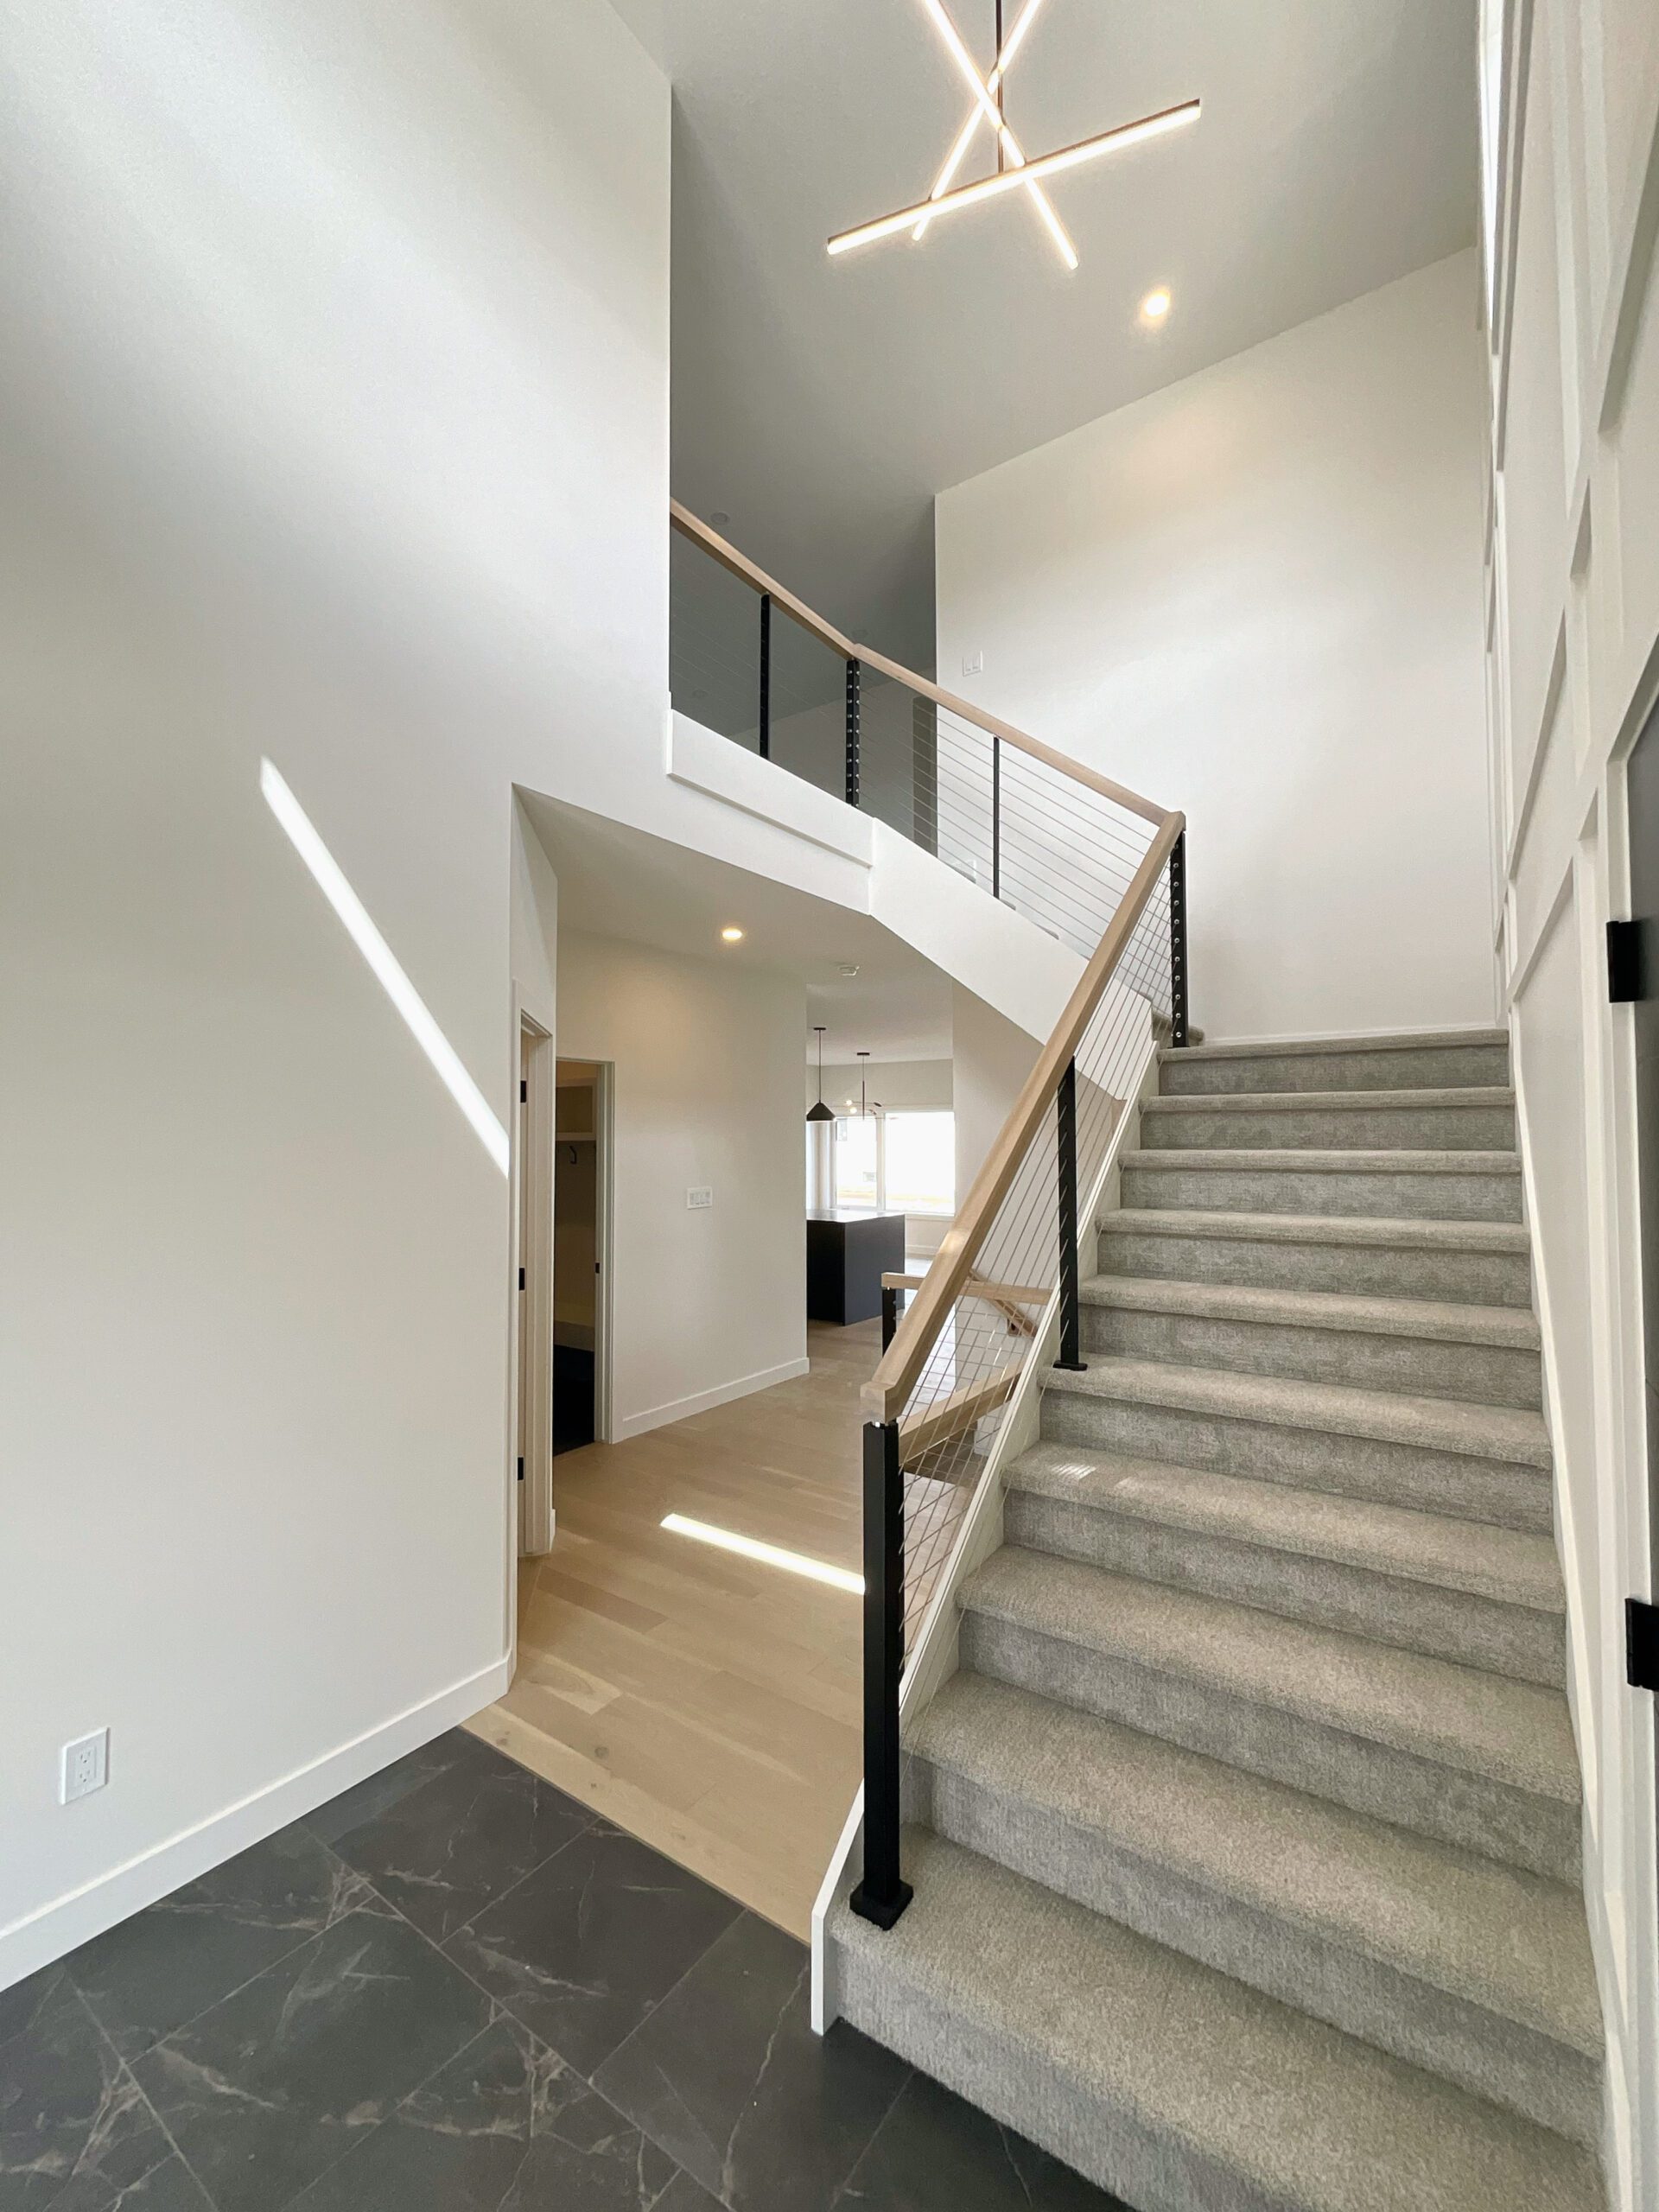 The staircase leading up to a second story with cable railing and large modern chandelier.